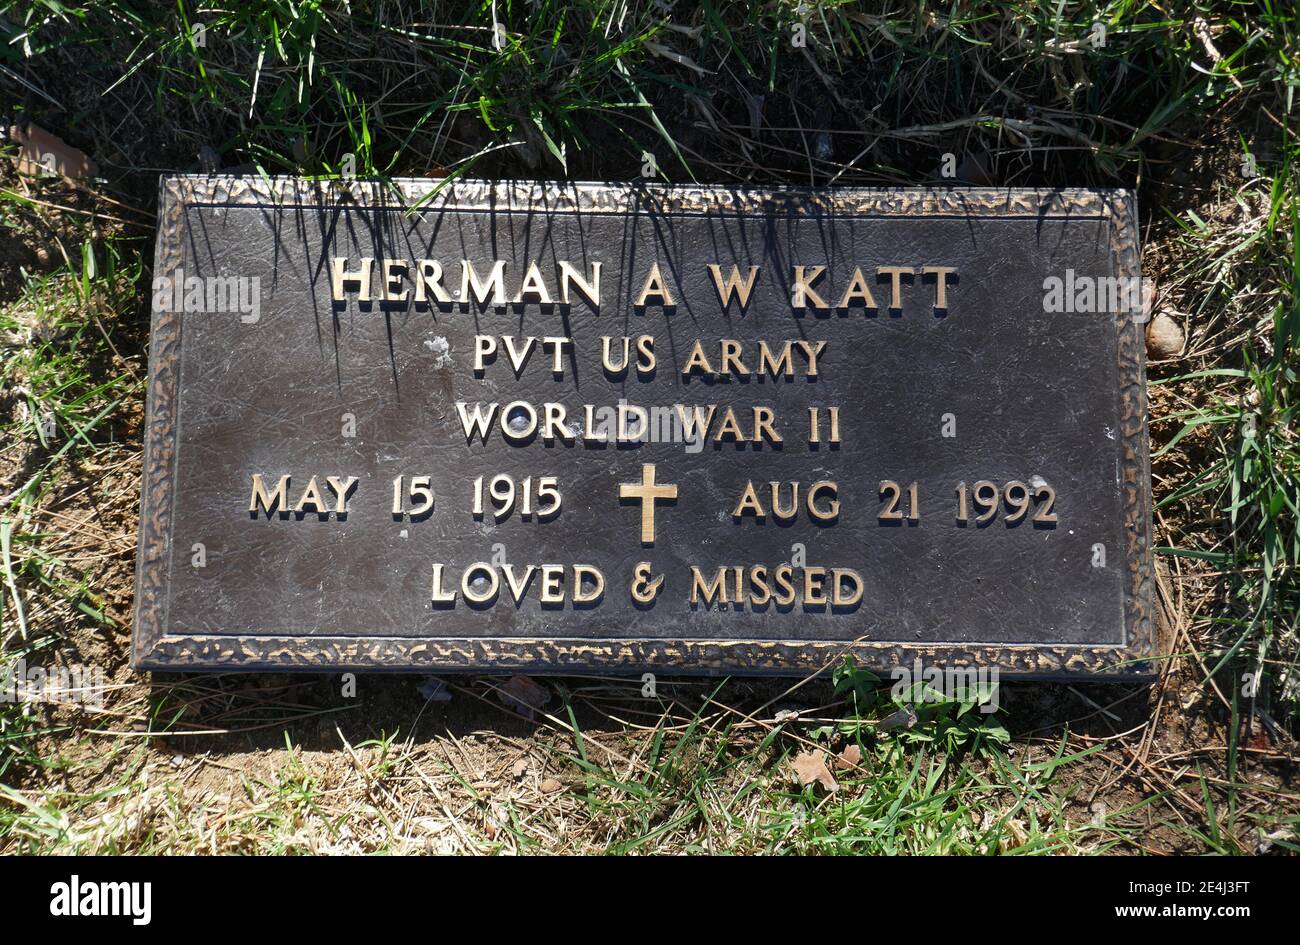 Los Angeles, California, USA 21st January 2021 A general view of atmosphere of actor Bill Williams Grave, aka William Herman Katt at Forest Lawn Memorial Park Hollywood Hills on January 21, 2021 in Los Angeles, California, USA. Photo by Barry King/Alamy Stock Photo Stock Photo